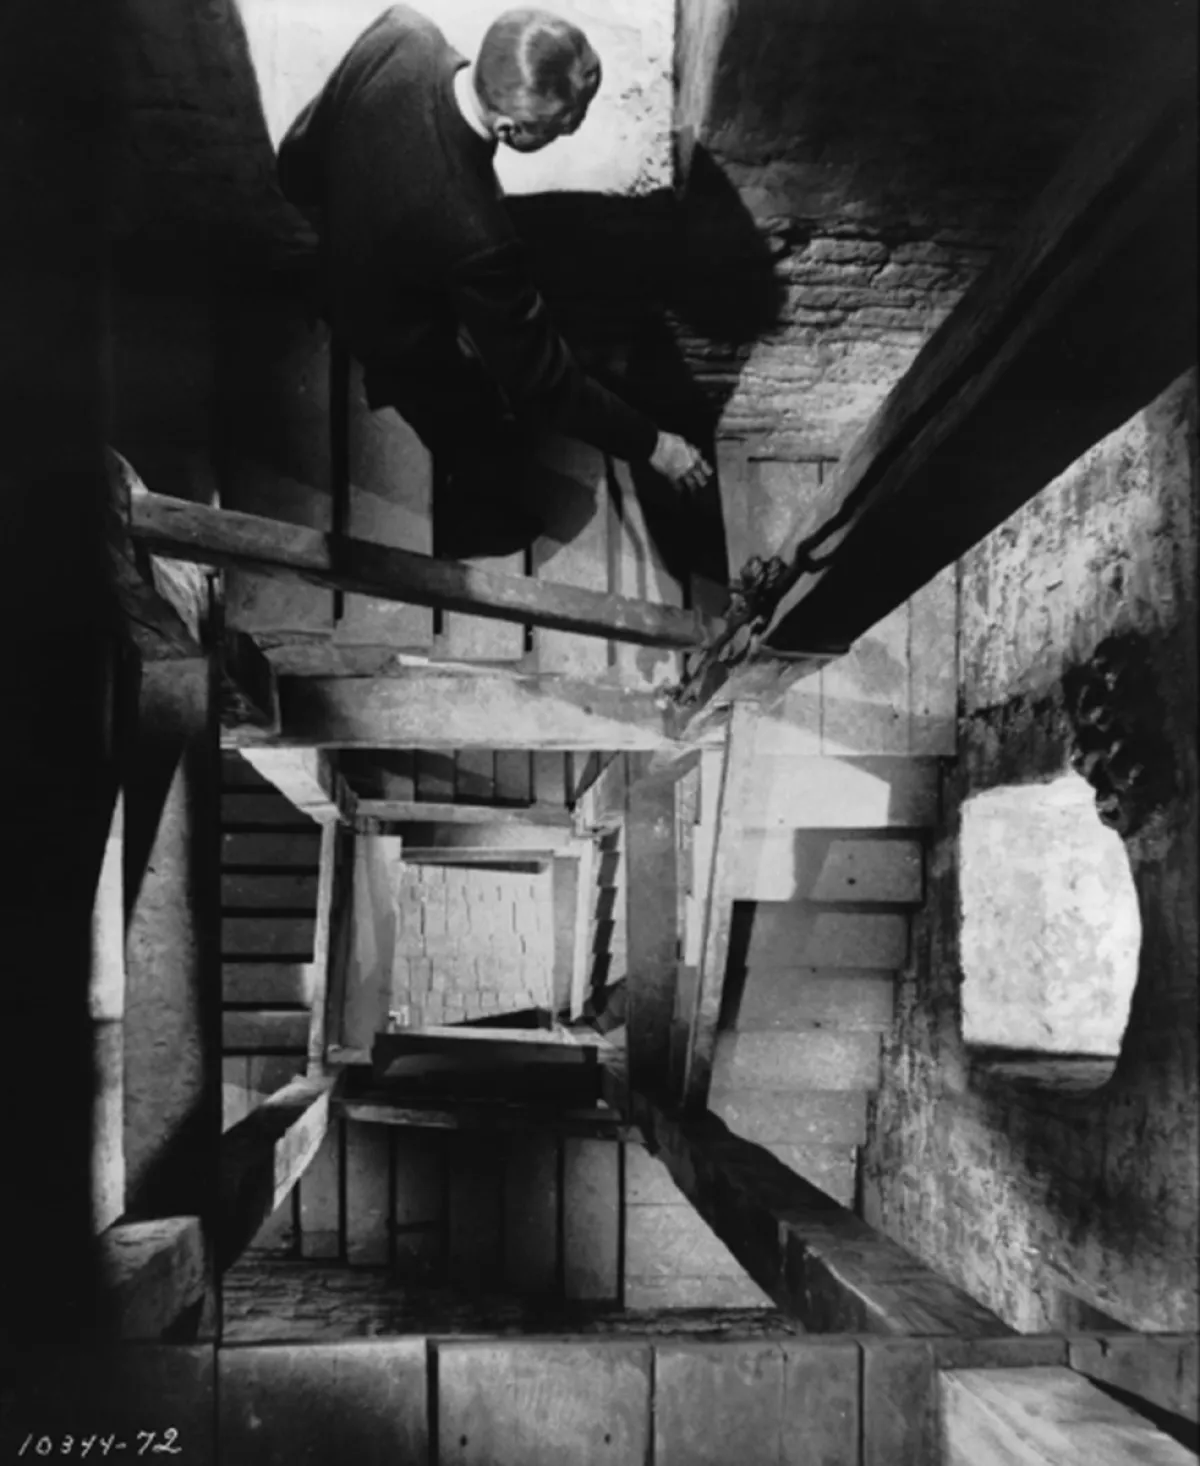 the stairwell in 'Vertigo' by Alfred Hitchcock